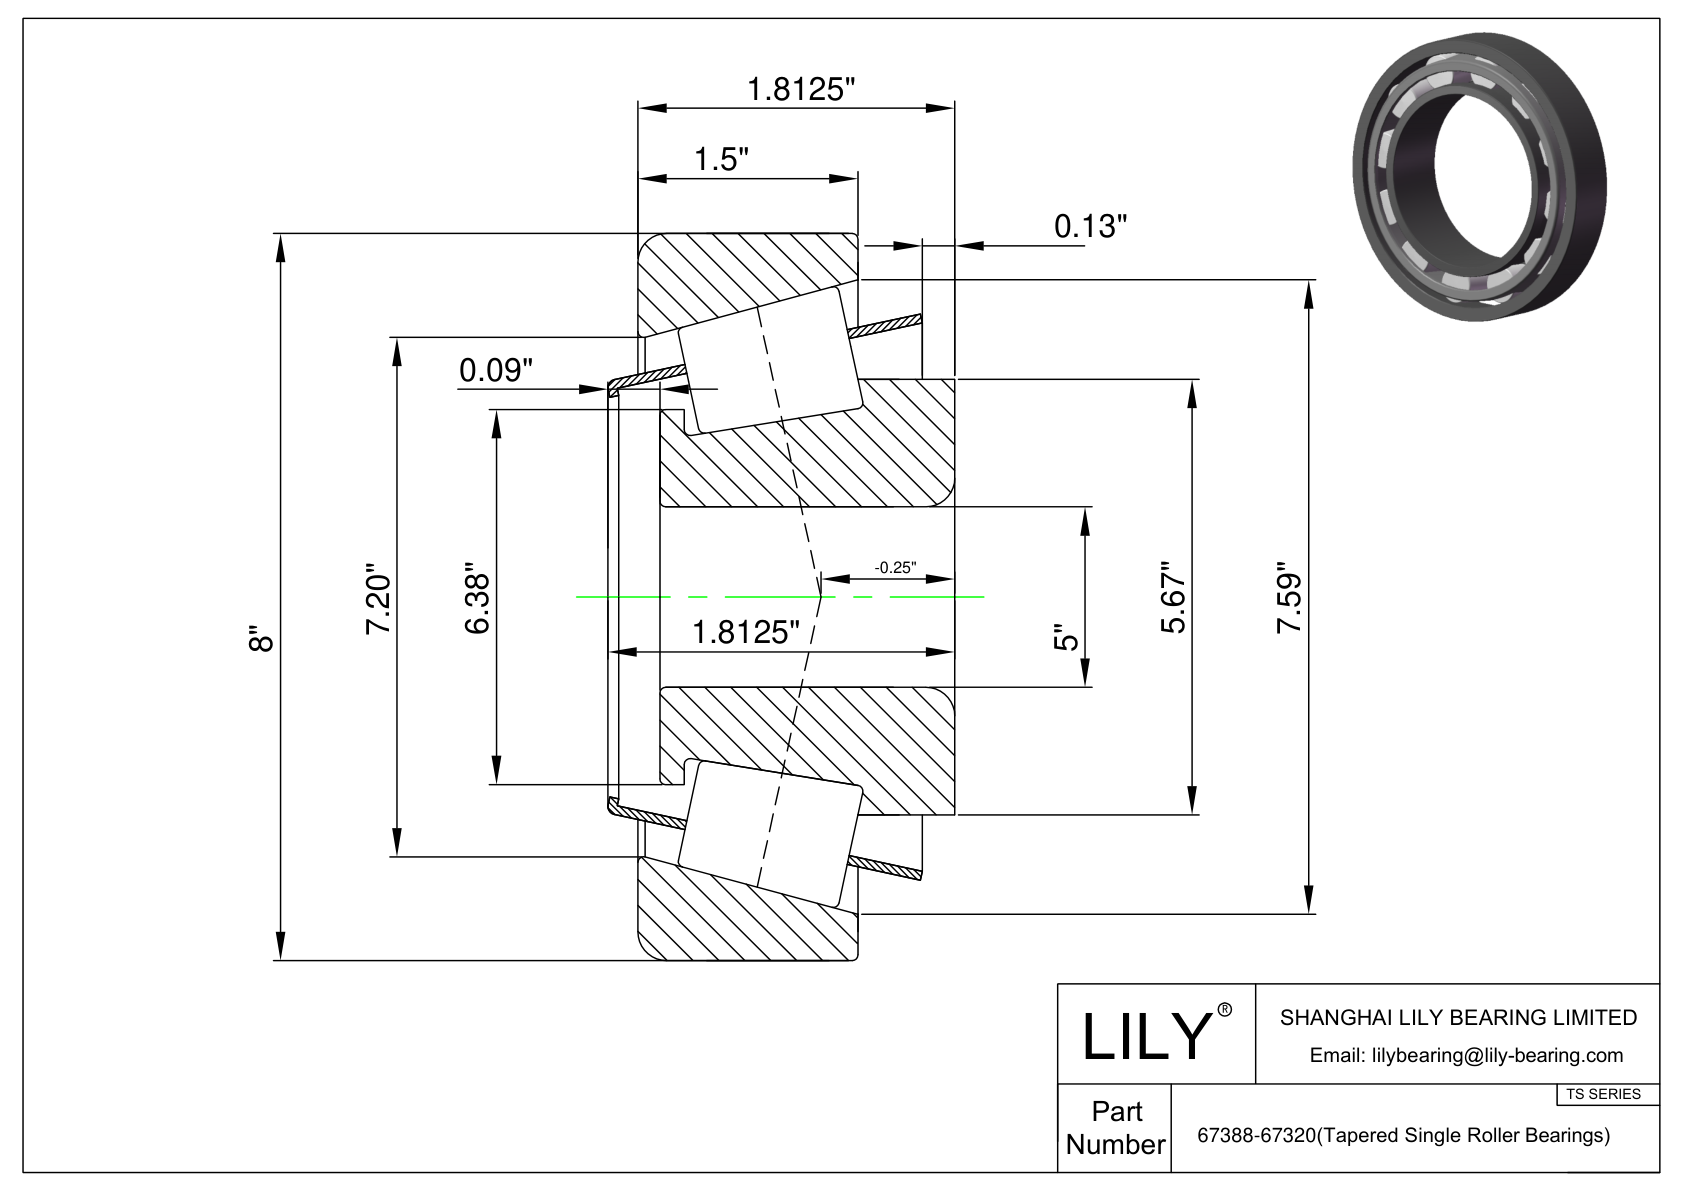 67388-67320 TS (Tapered Single Roller Bearings) (Imperial) cad drawing